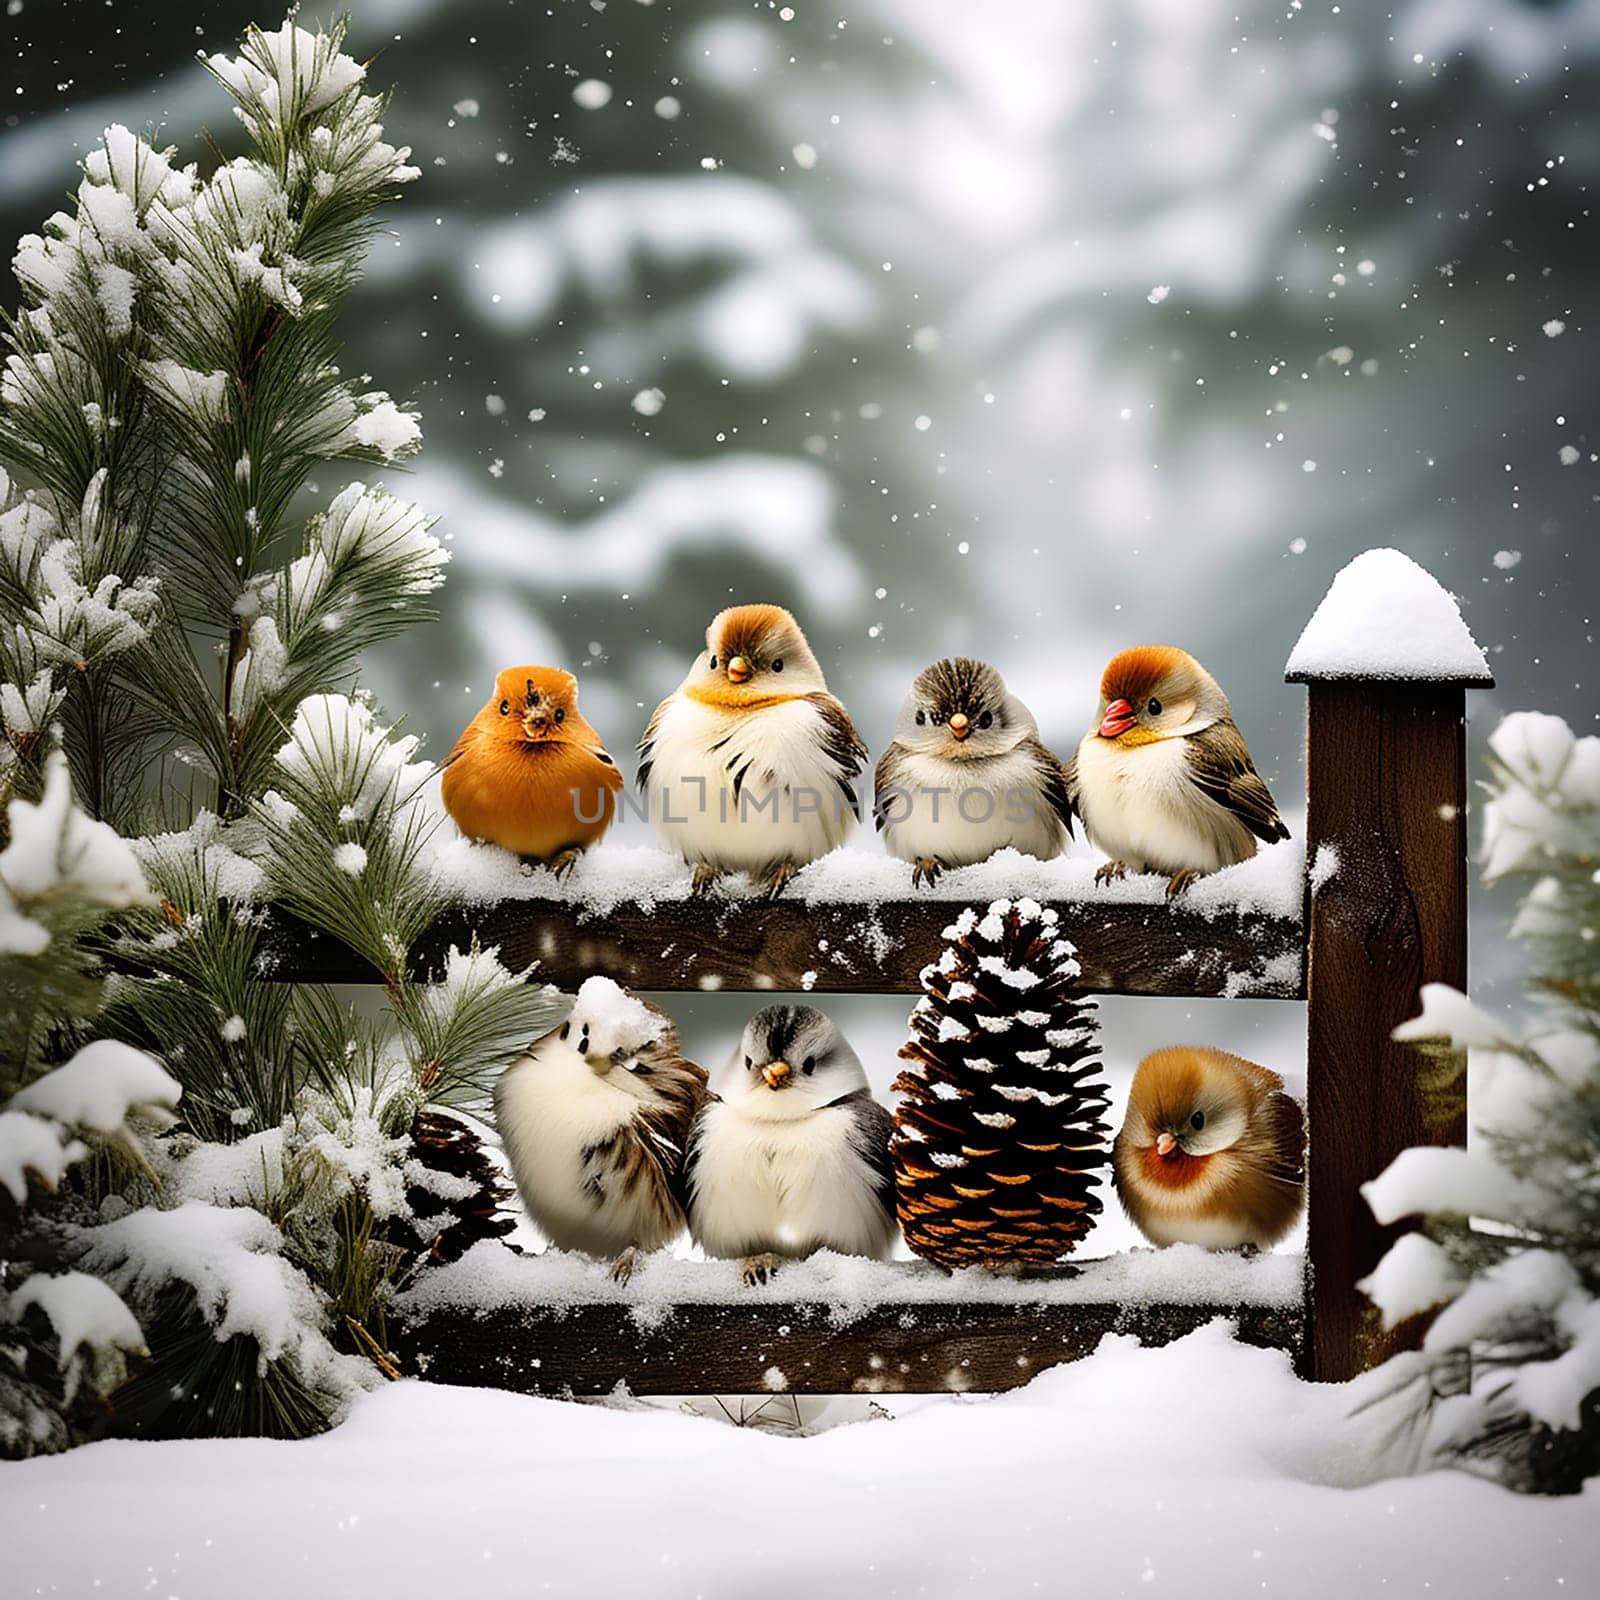 Animals Behind a Wooden Fence with Falling Snow and Pine Needle Branches by Petrichor